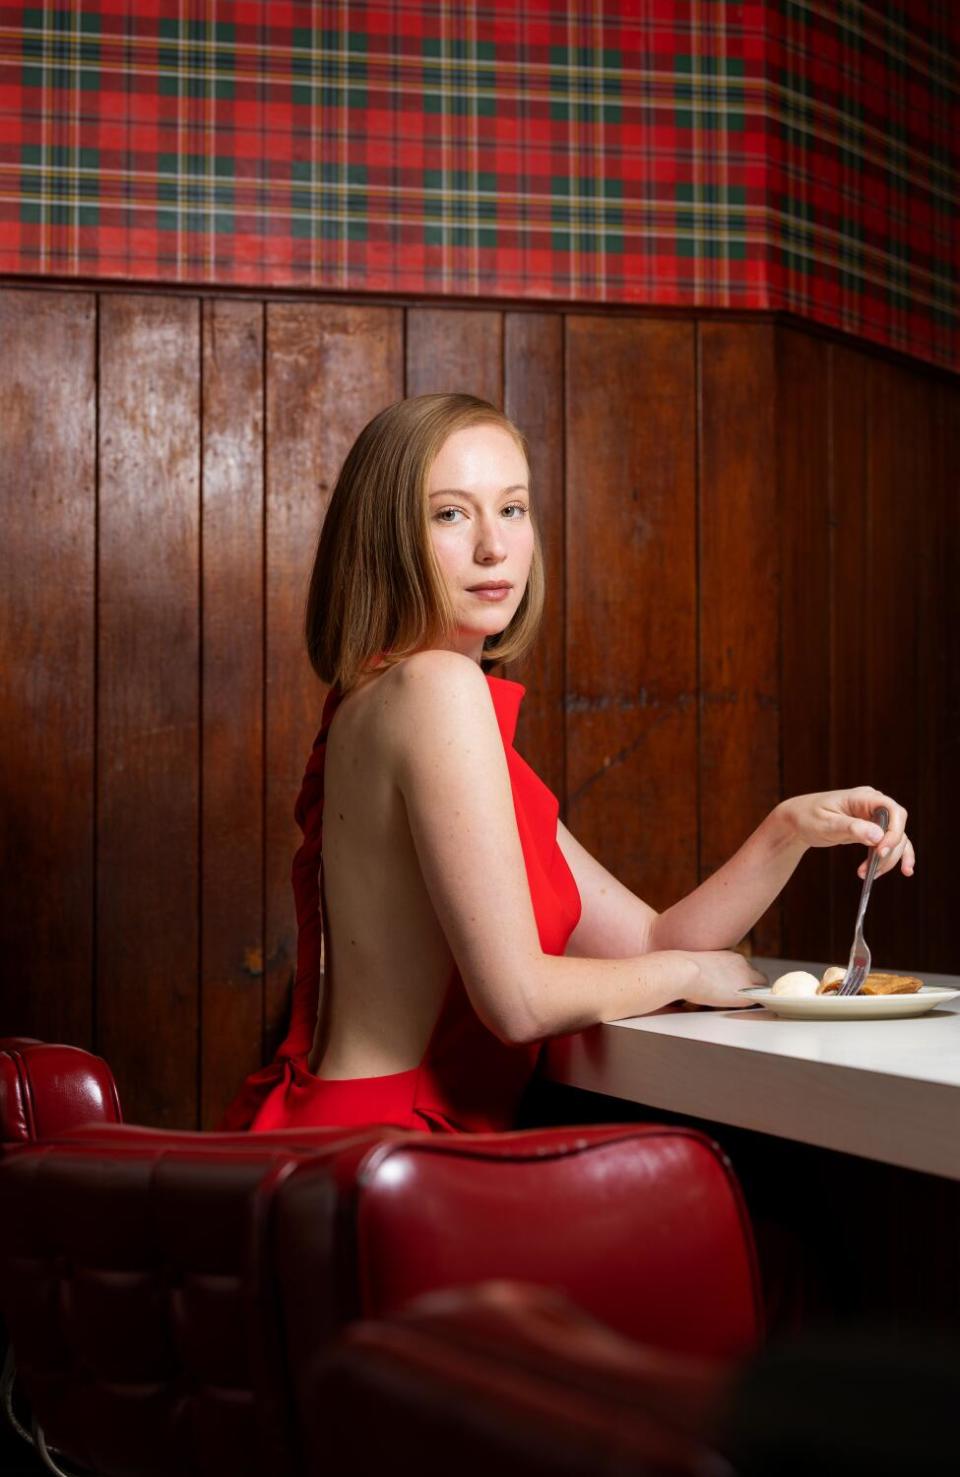 Hannah Einbinder in a backless red dress sits at a diner counter sticking a fork into something on her plate